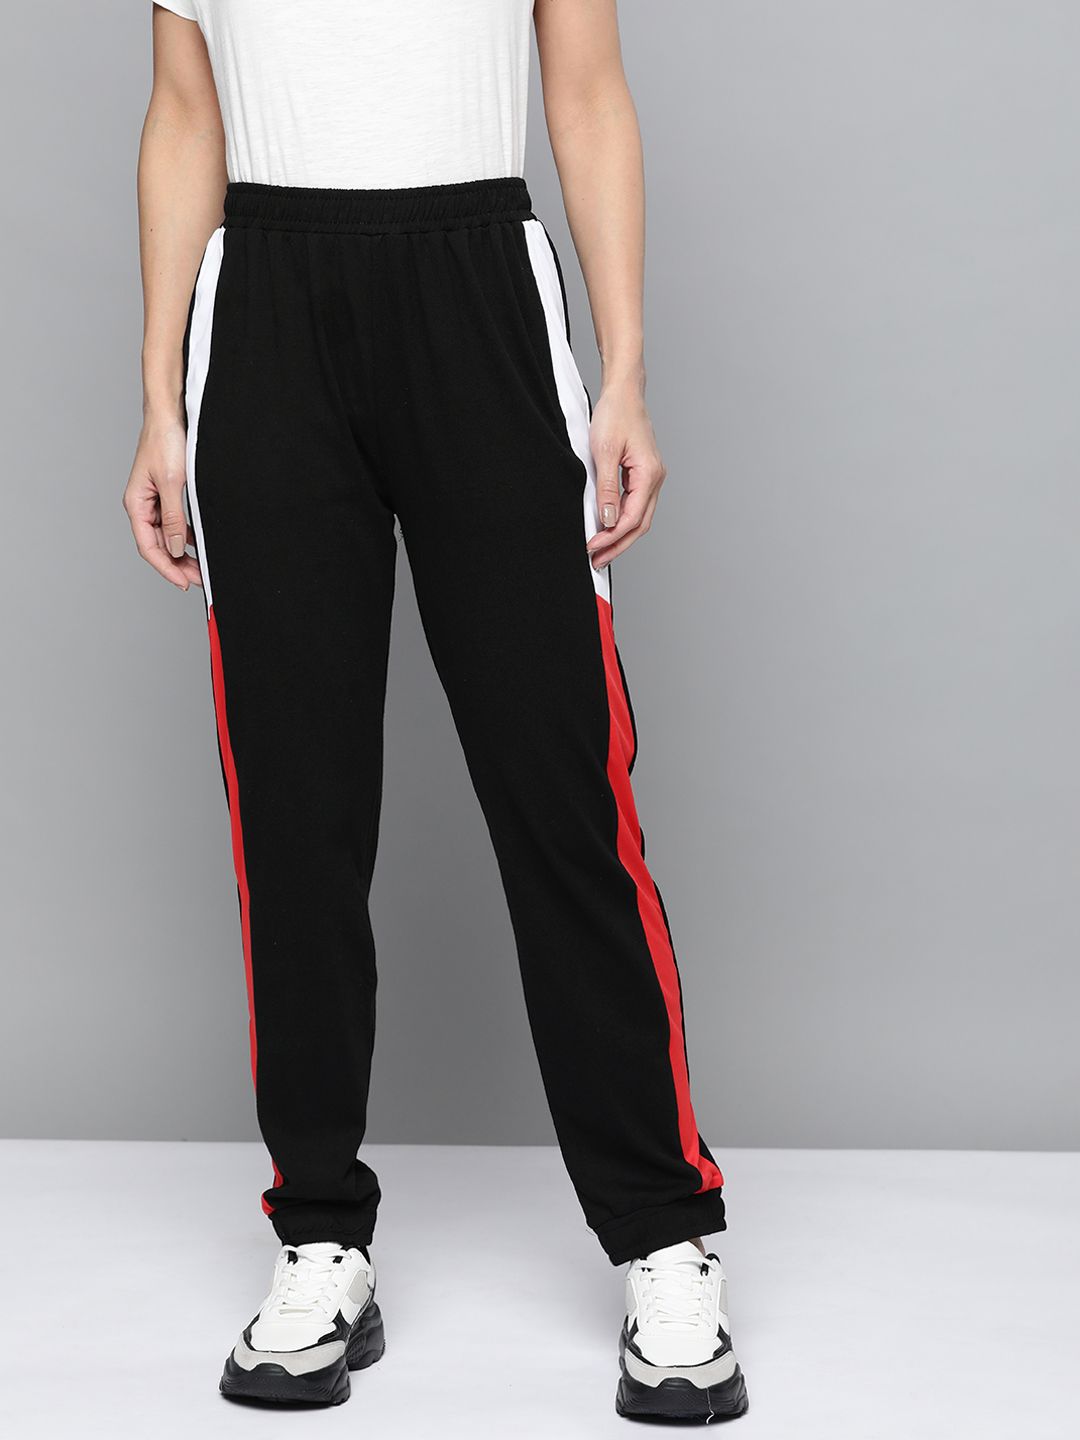 Harvard Women Black Solid Joggers with Colourblocked Detail Price in India